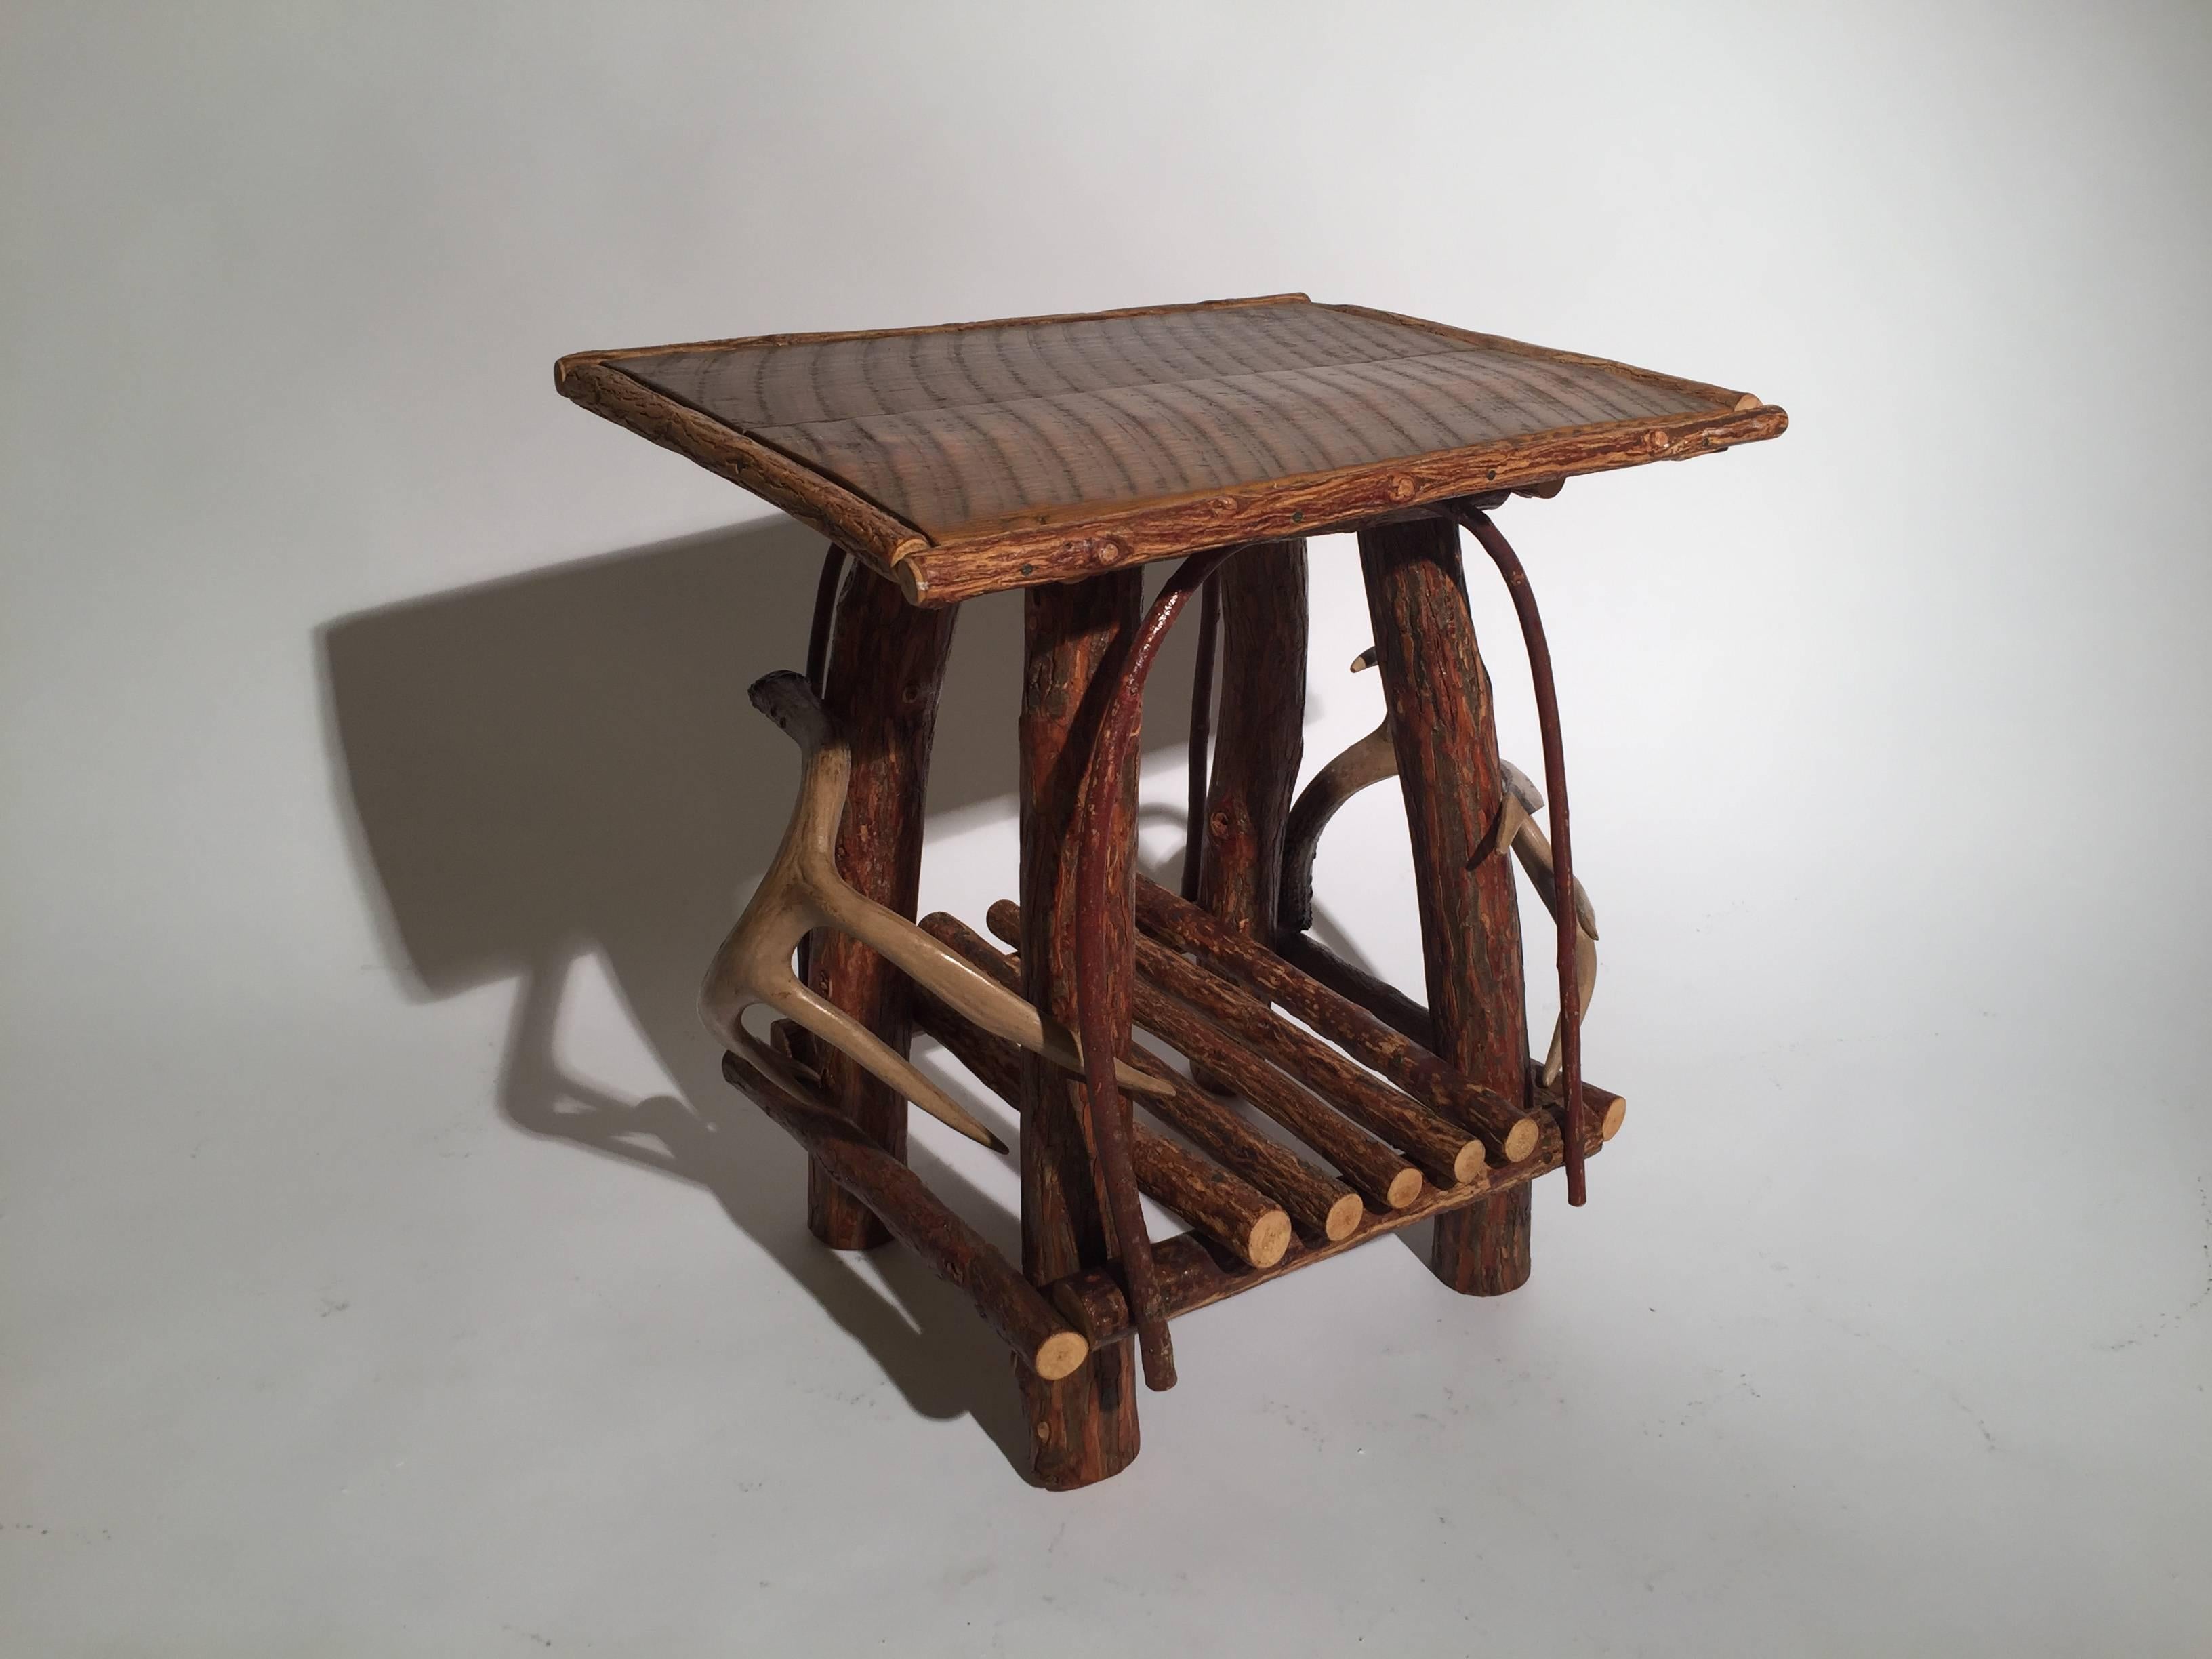 Adirondack style table with horn mounts, great for your lake house.
      